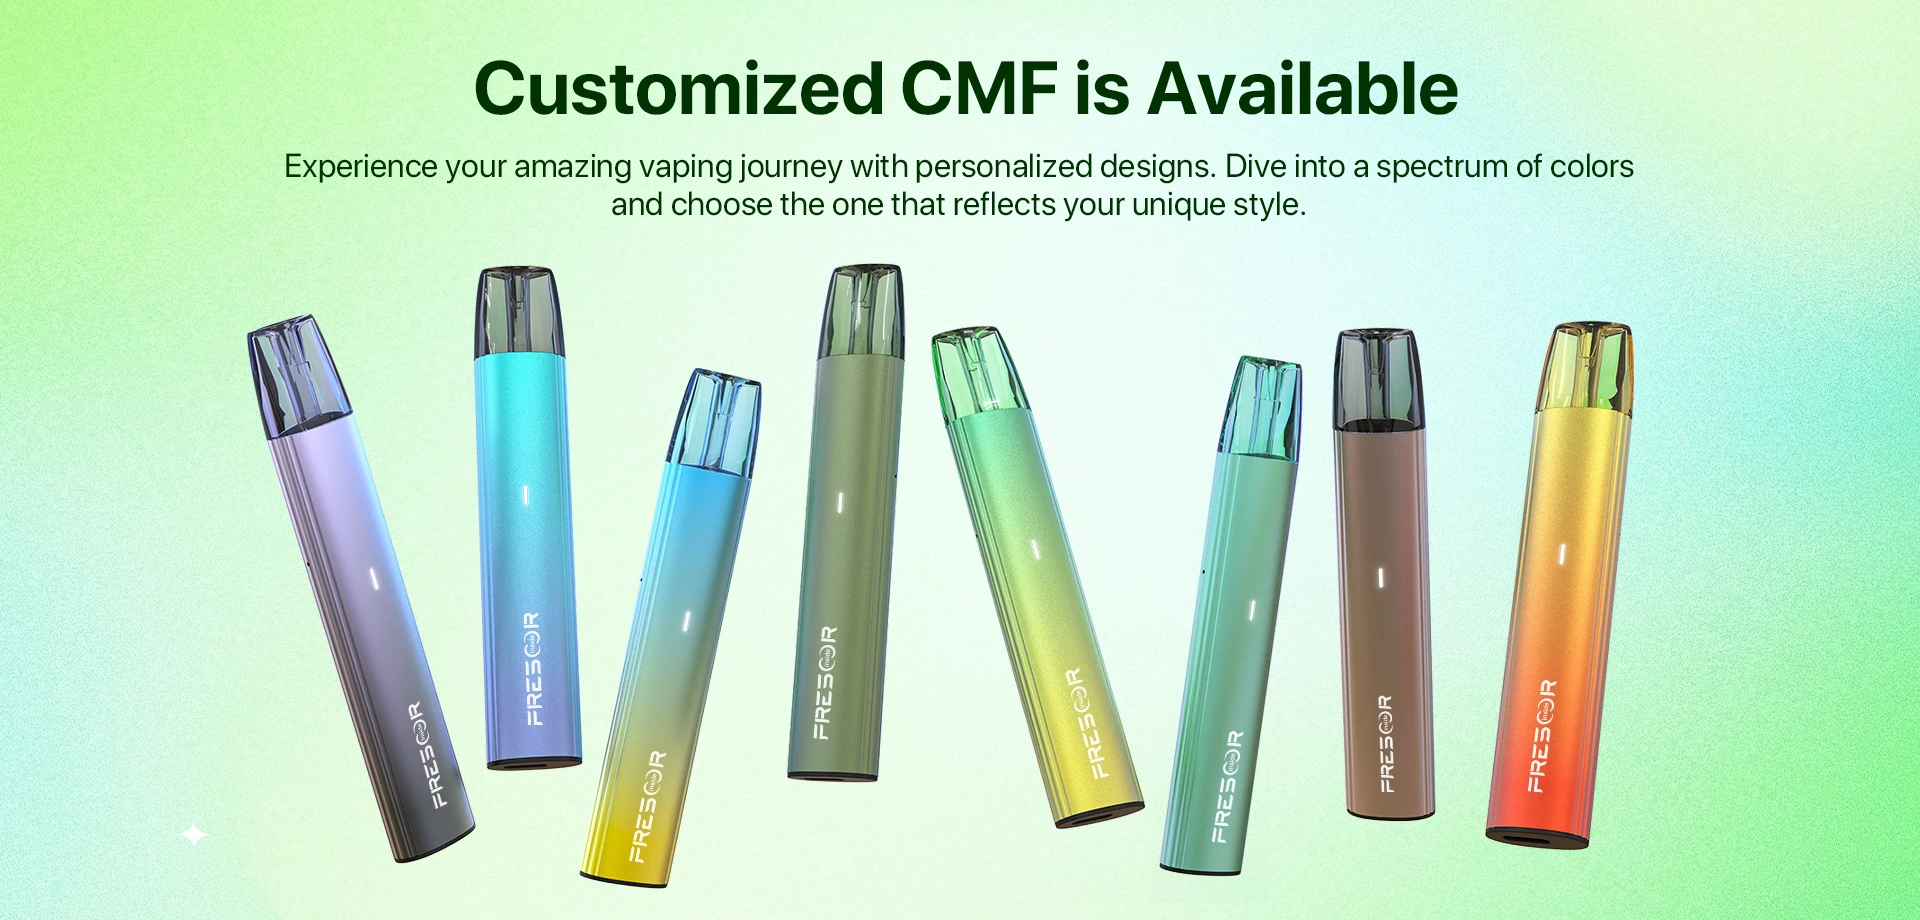 Customized CMF is Available Experience your amazing vaping journey with personalized designs. Dive into a spectrum of colors and choose the one that reflects your unique style.